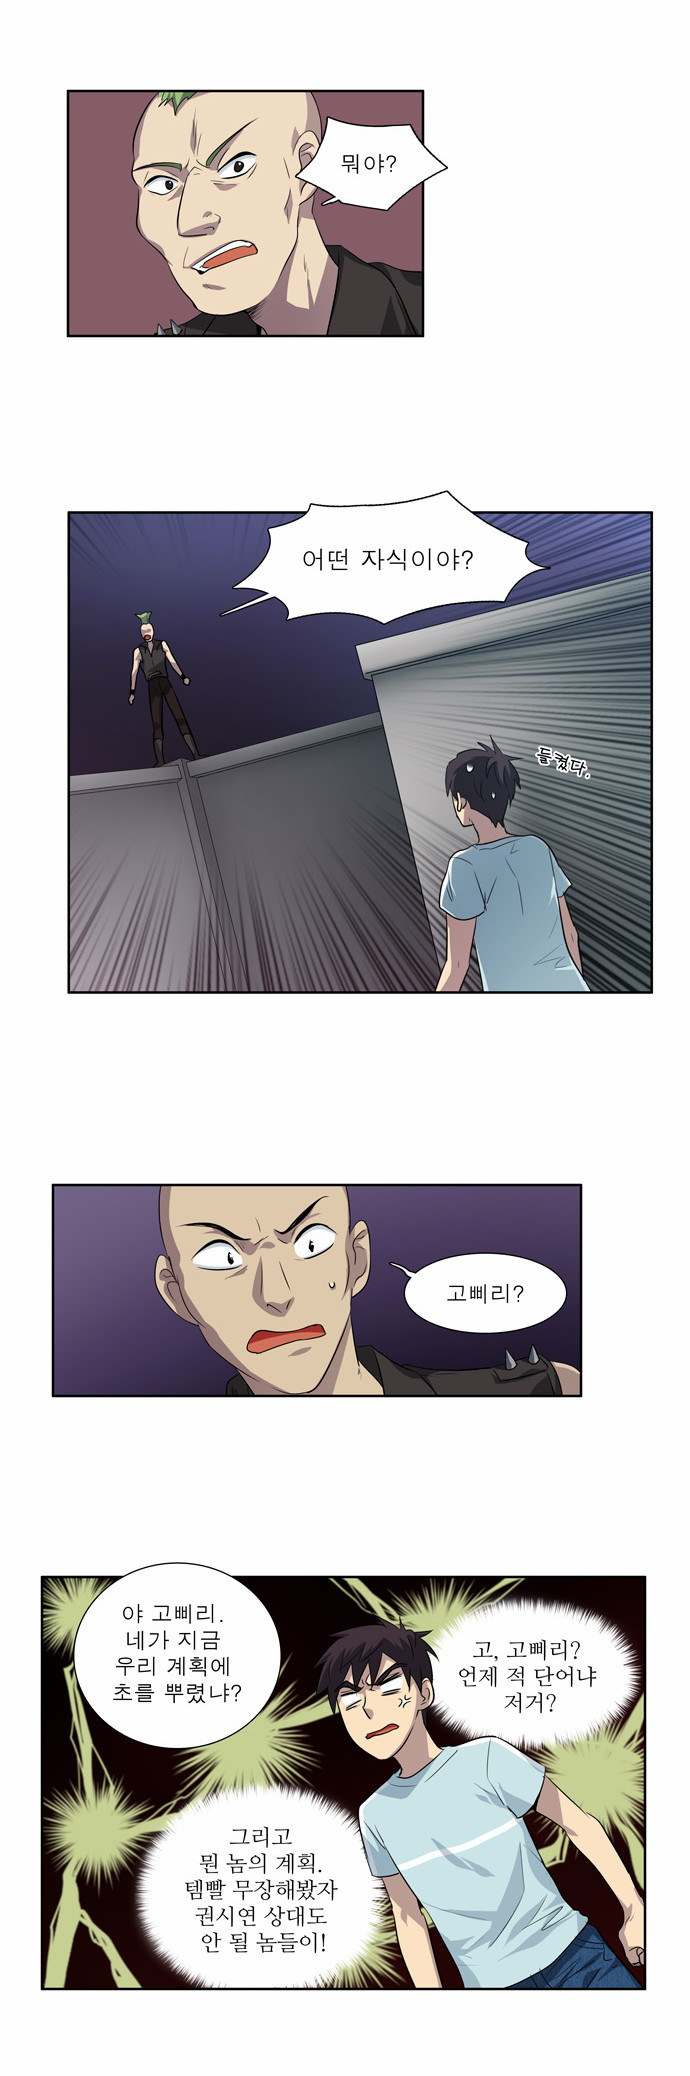 The Gamer - Chapter 42 - Page 3